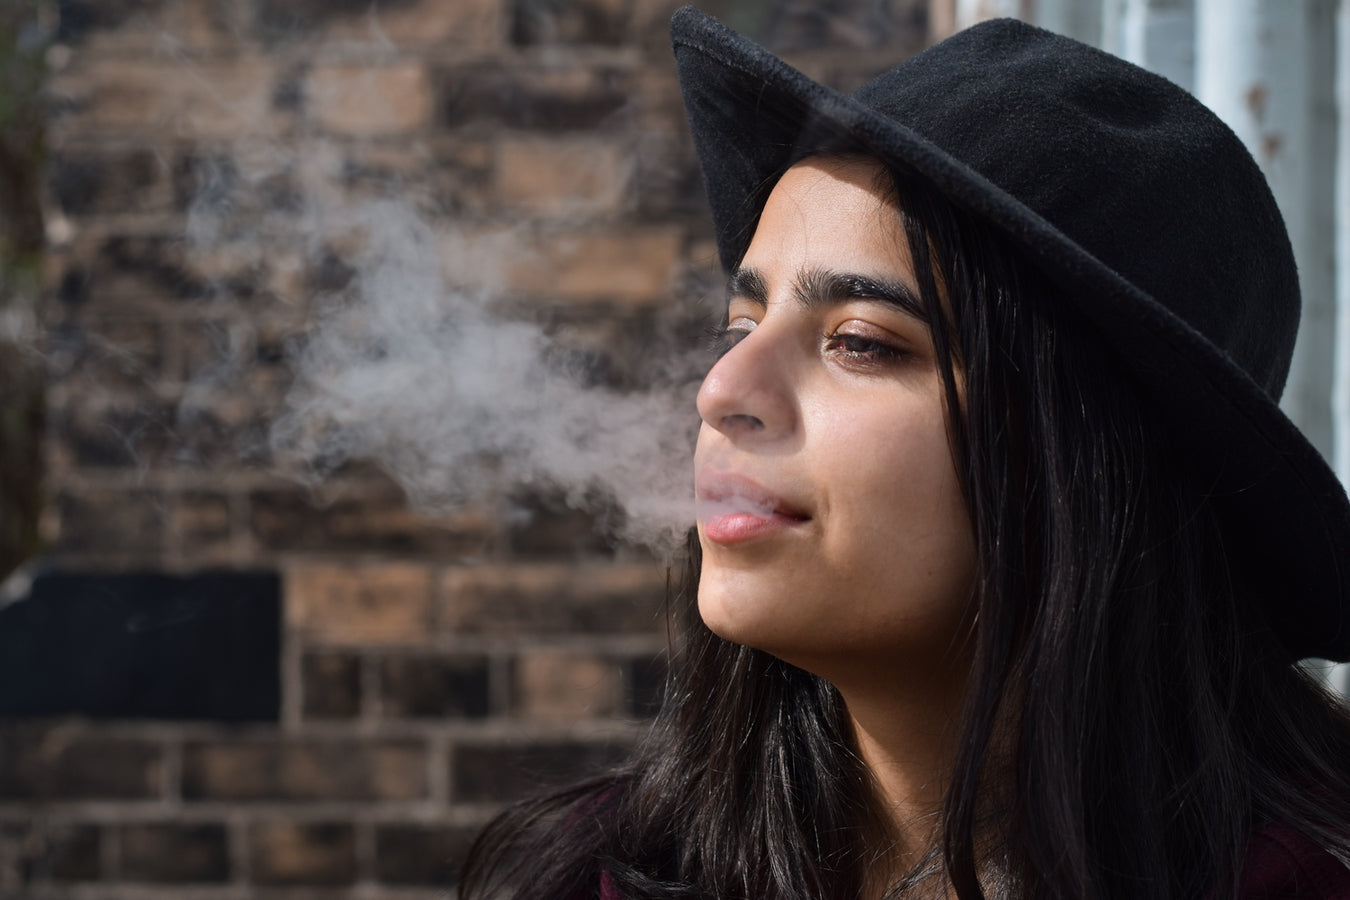 Woman exhaling vape cloud while on trip